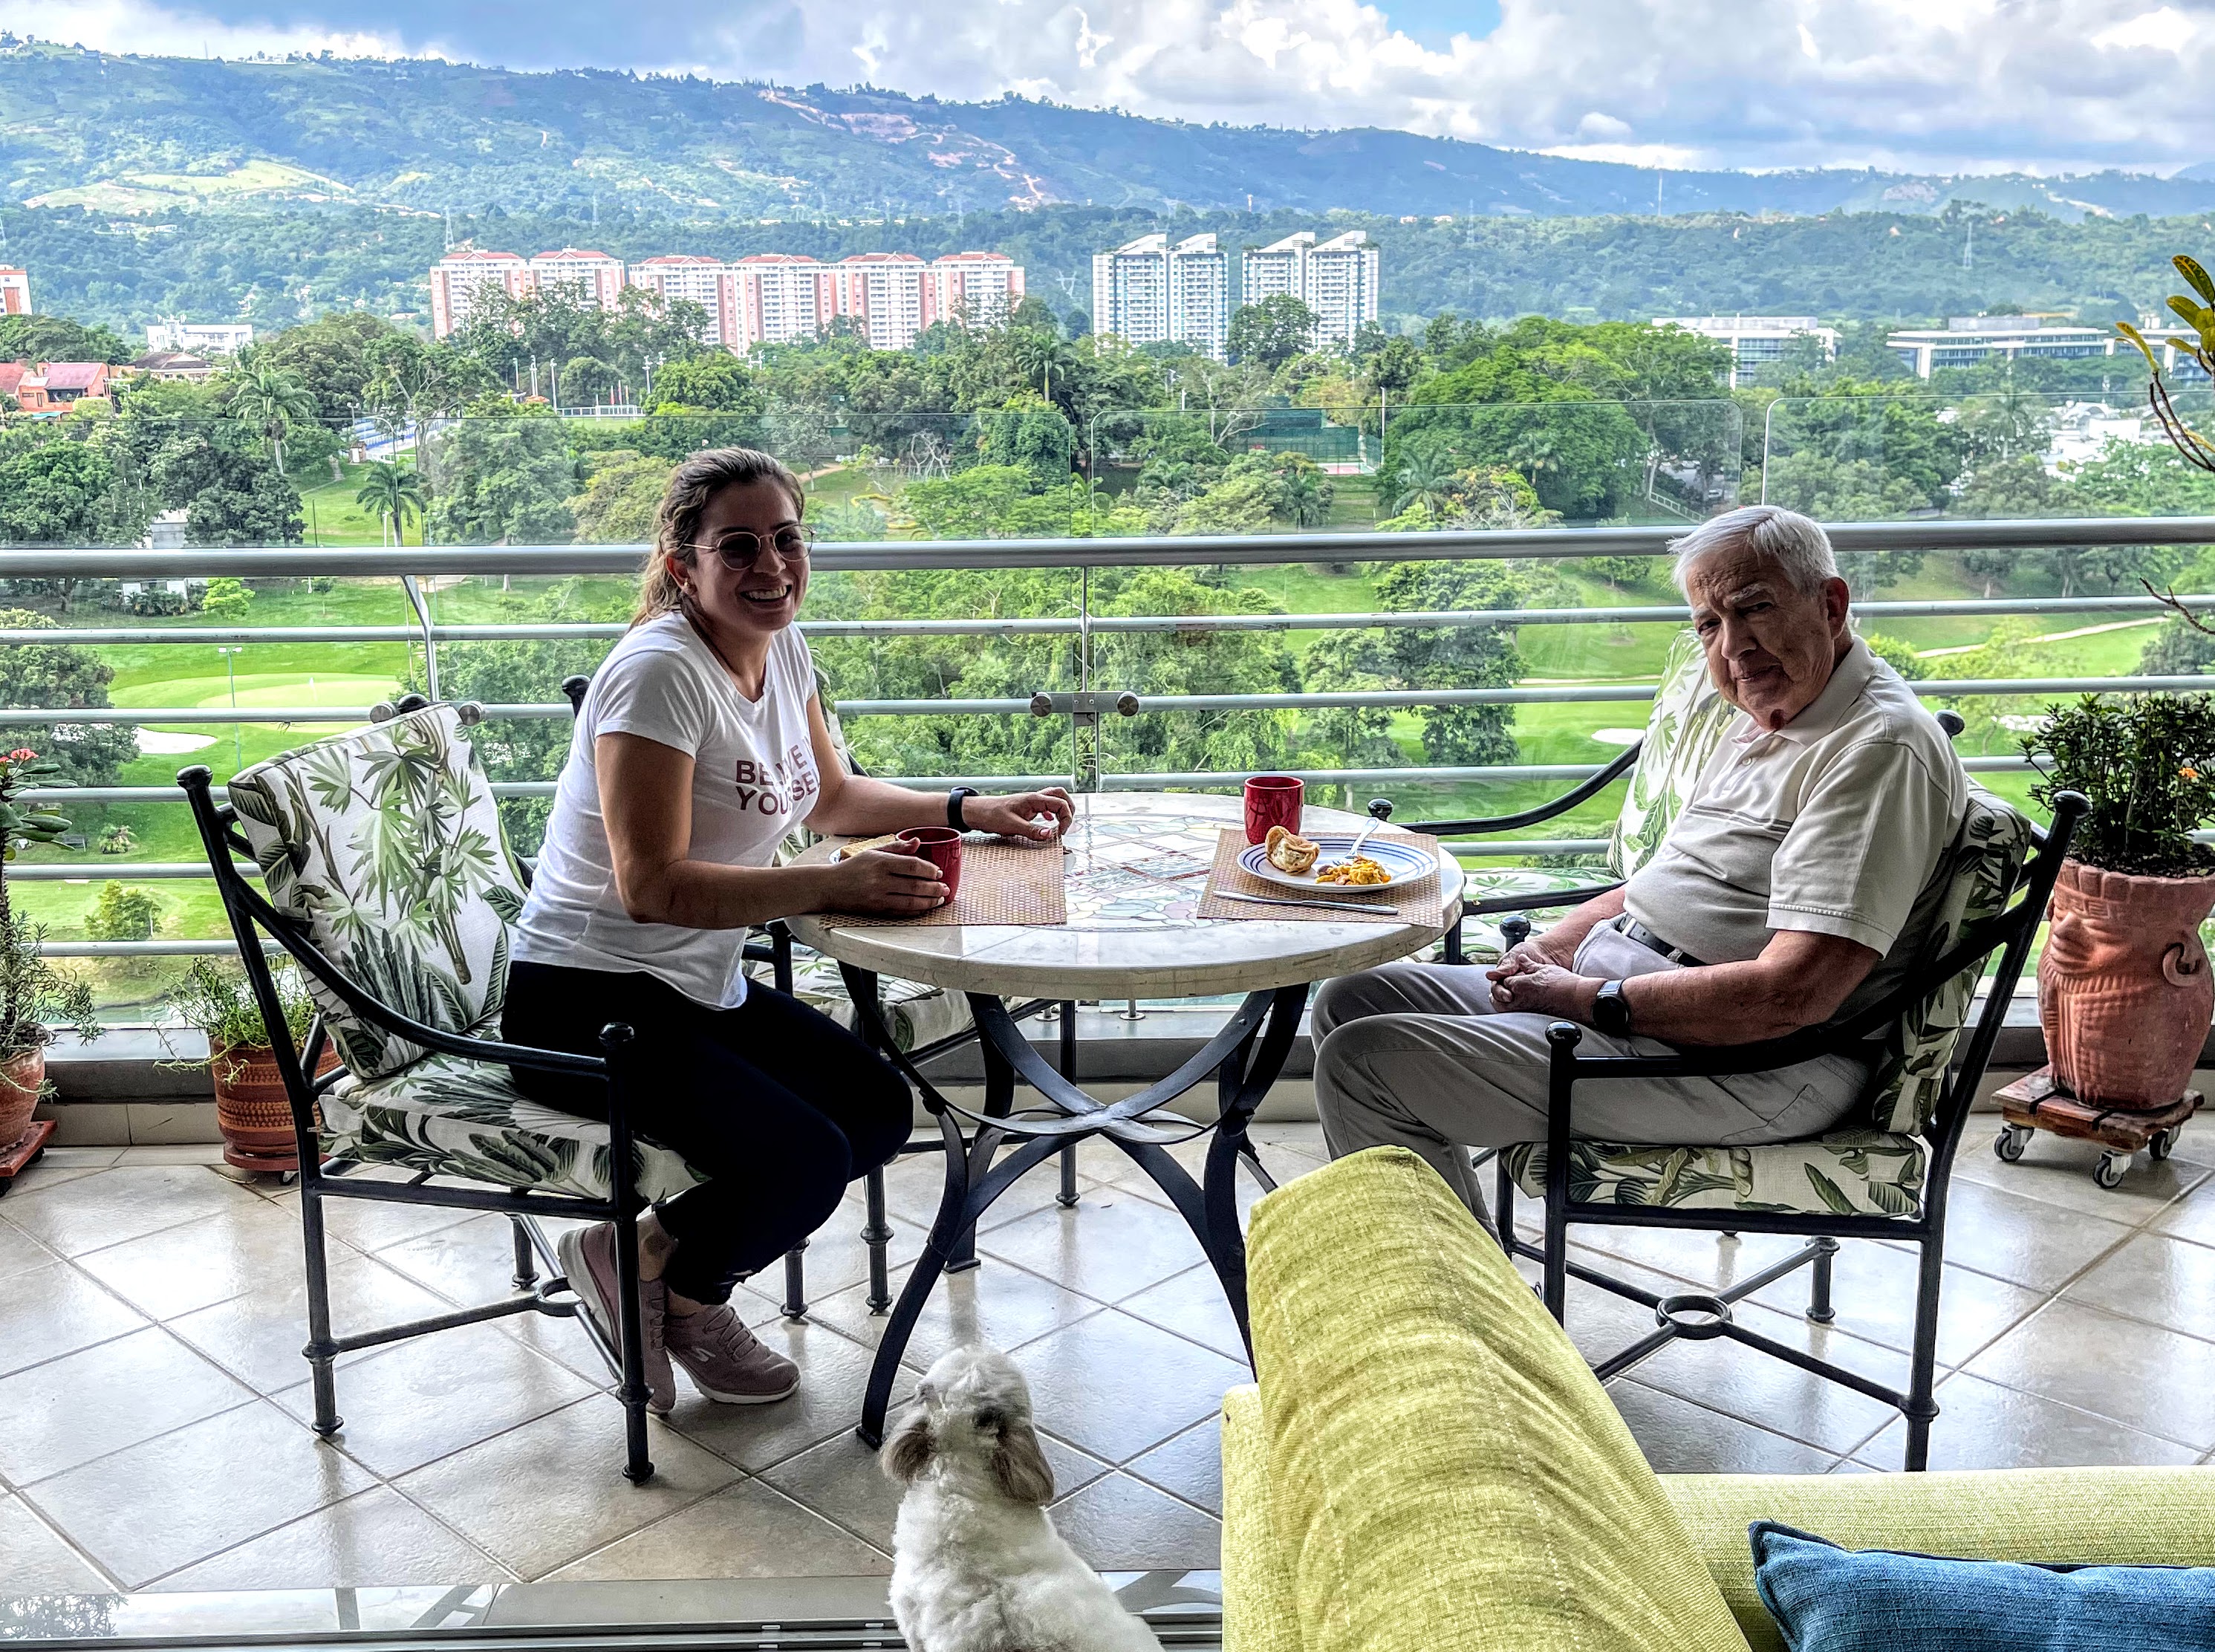 Retiree and maid sitting down to breakfast on the terrace with a view of the Andes in the background.